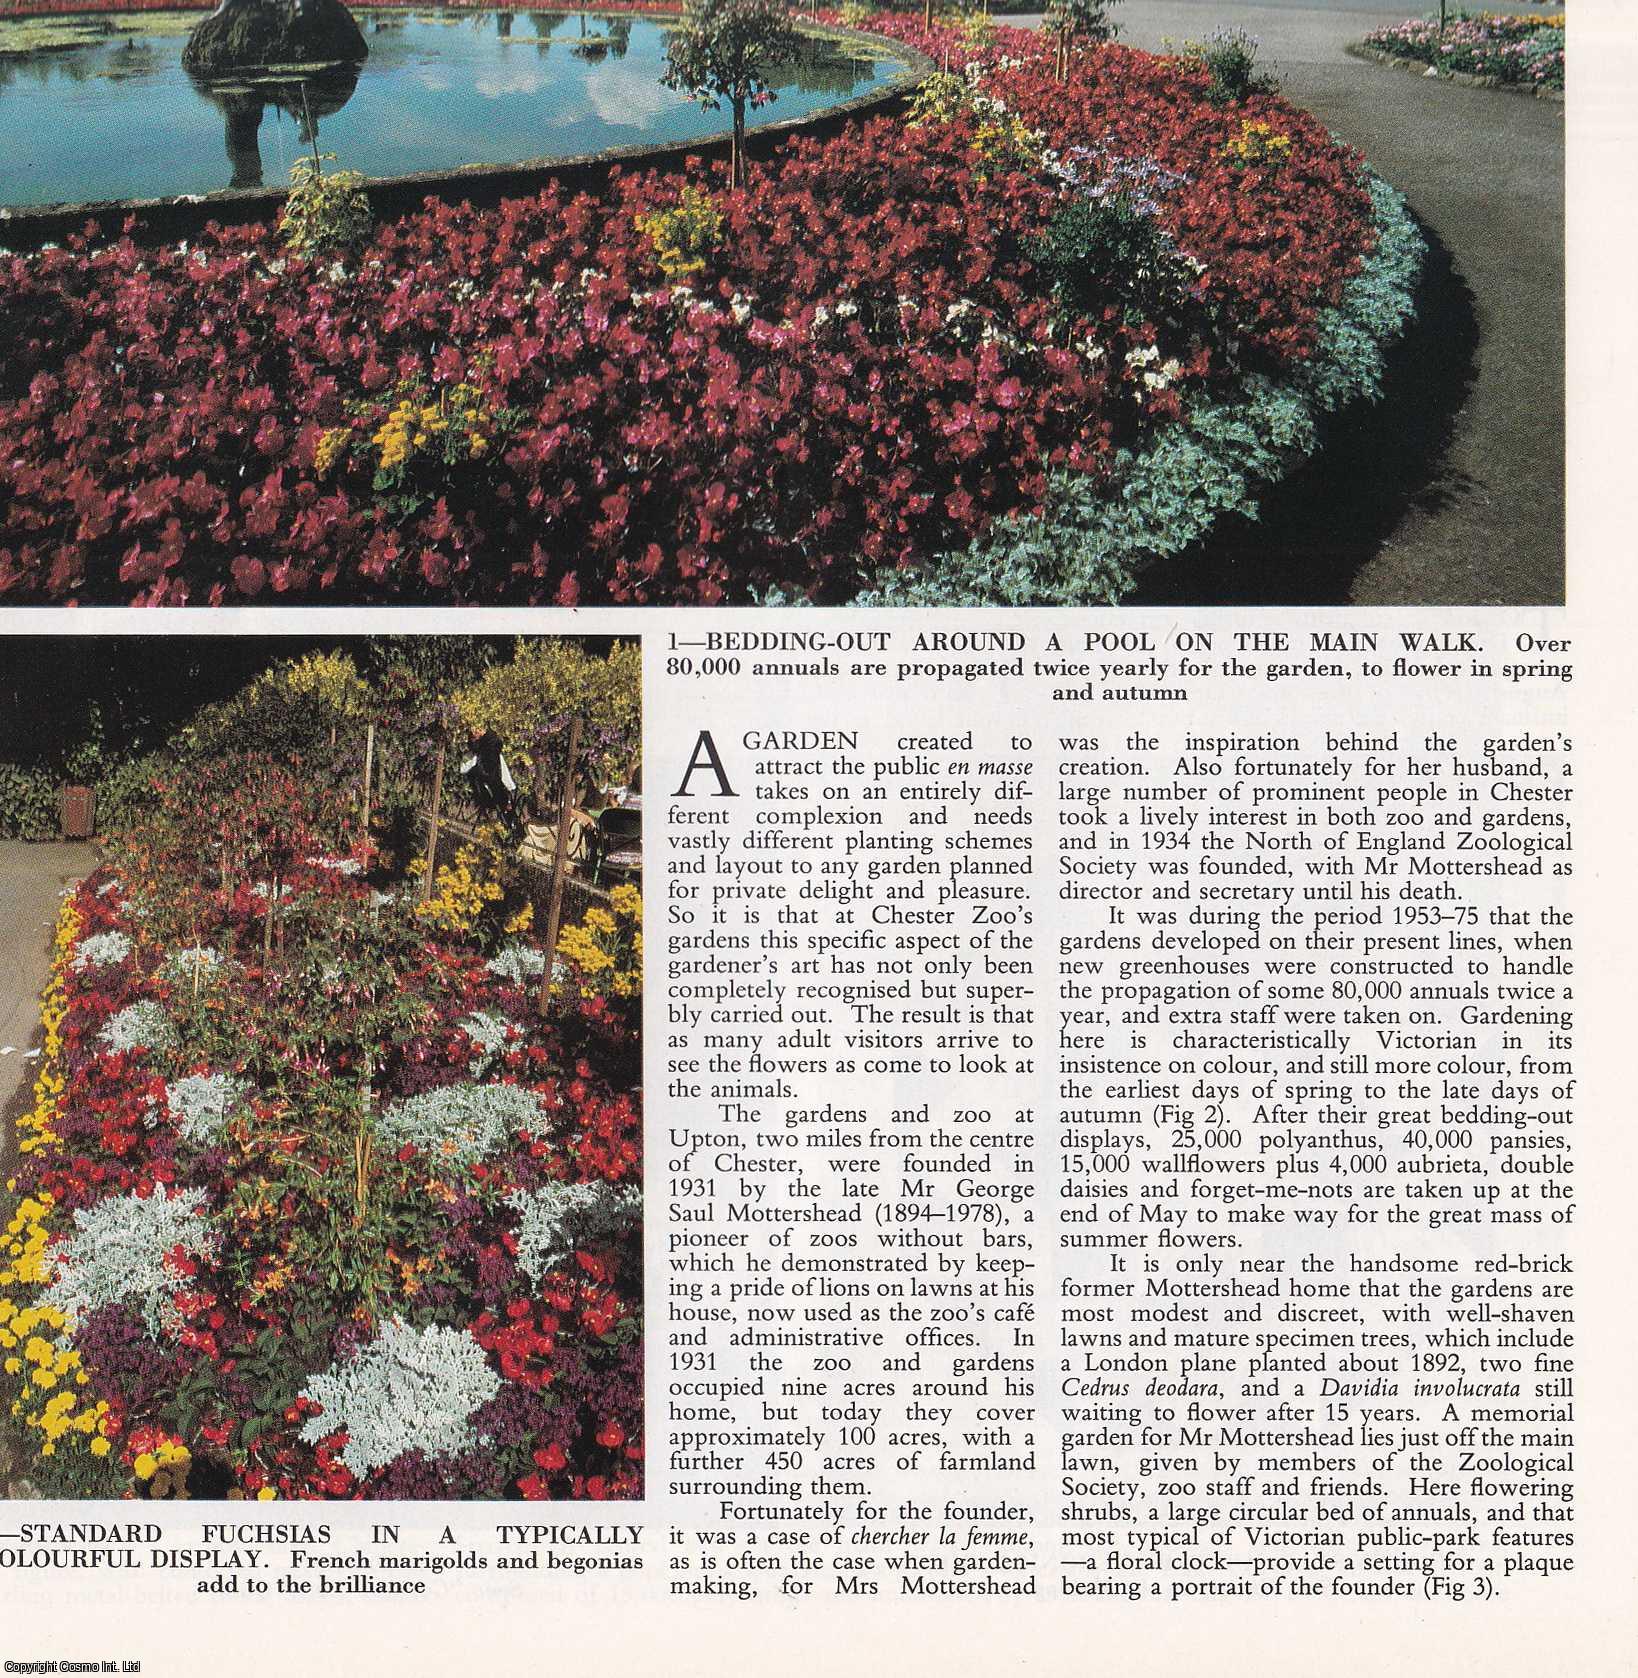 Ken Lemmon - The Gardens of Chester Zoo. Several pictures and accompanying text, removed from an original issue of Country Life Magazine, 1985.